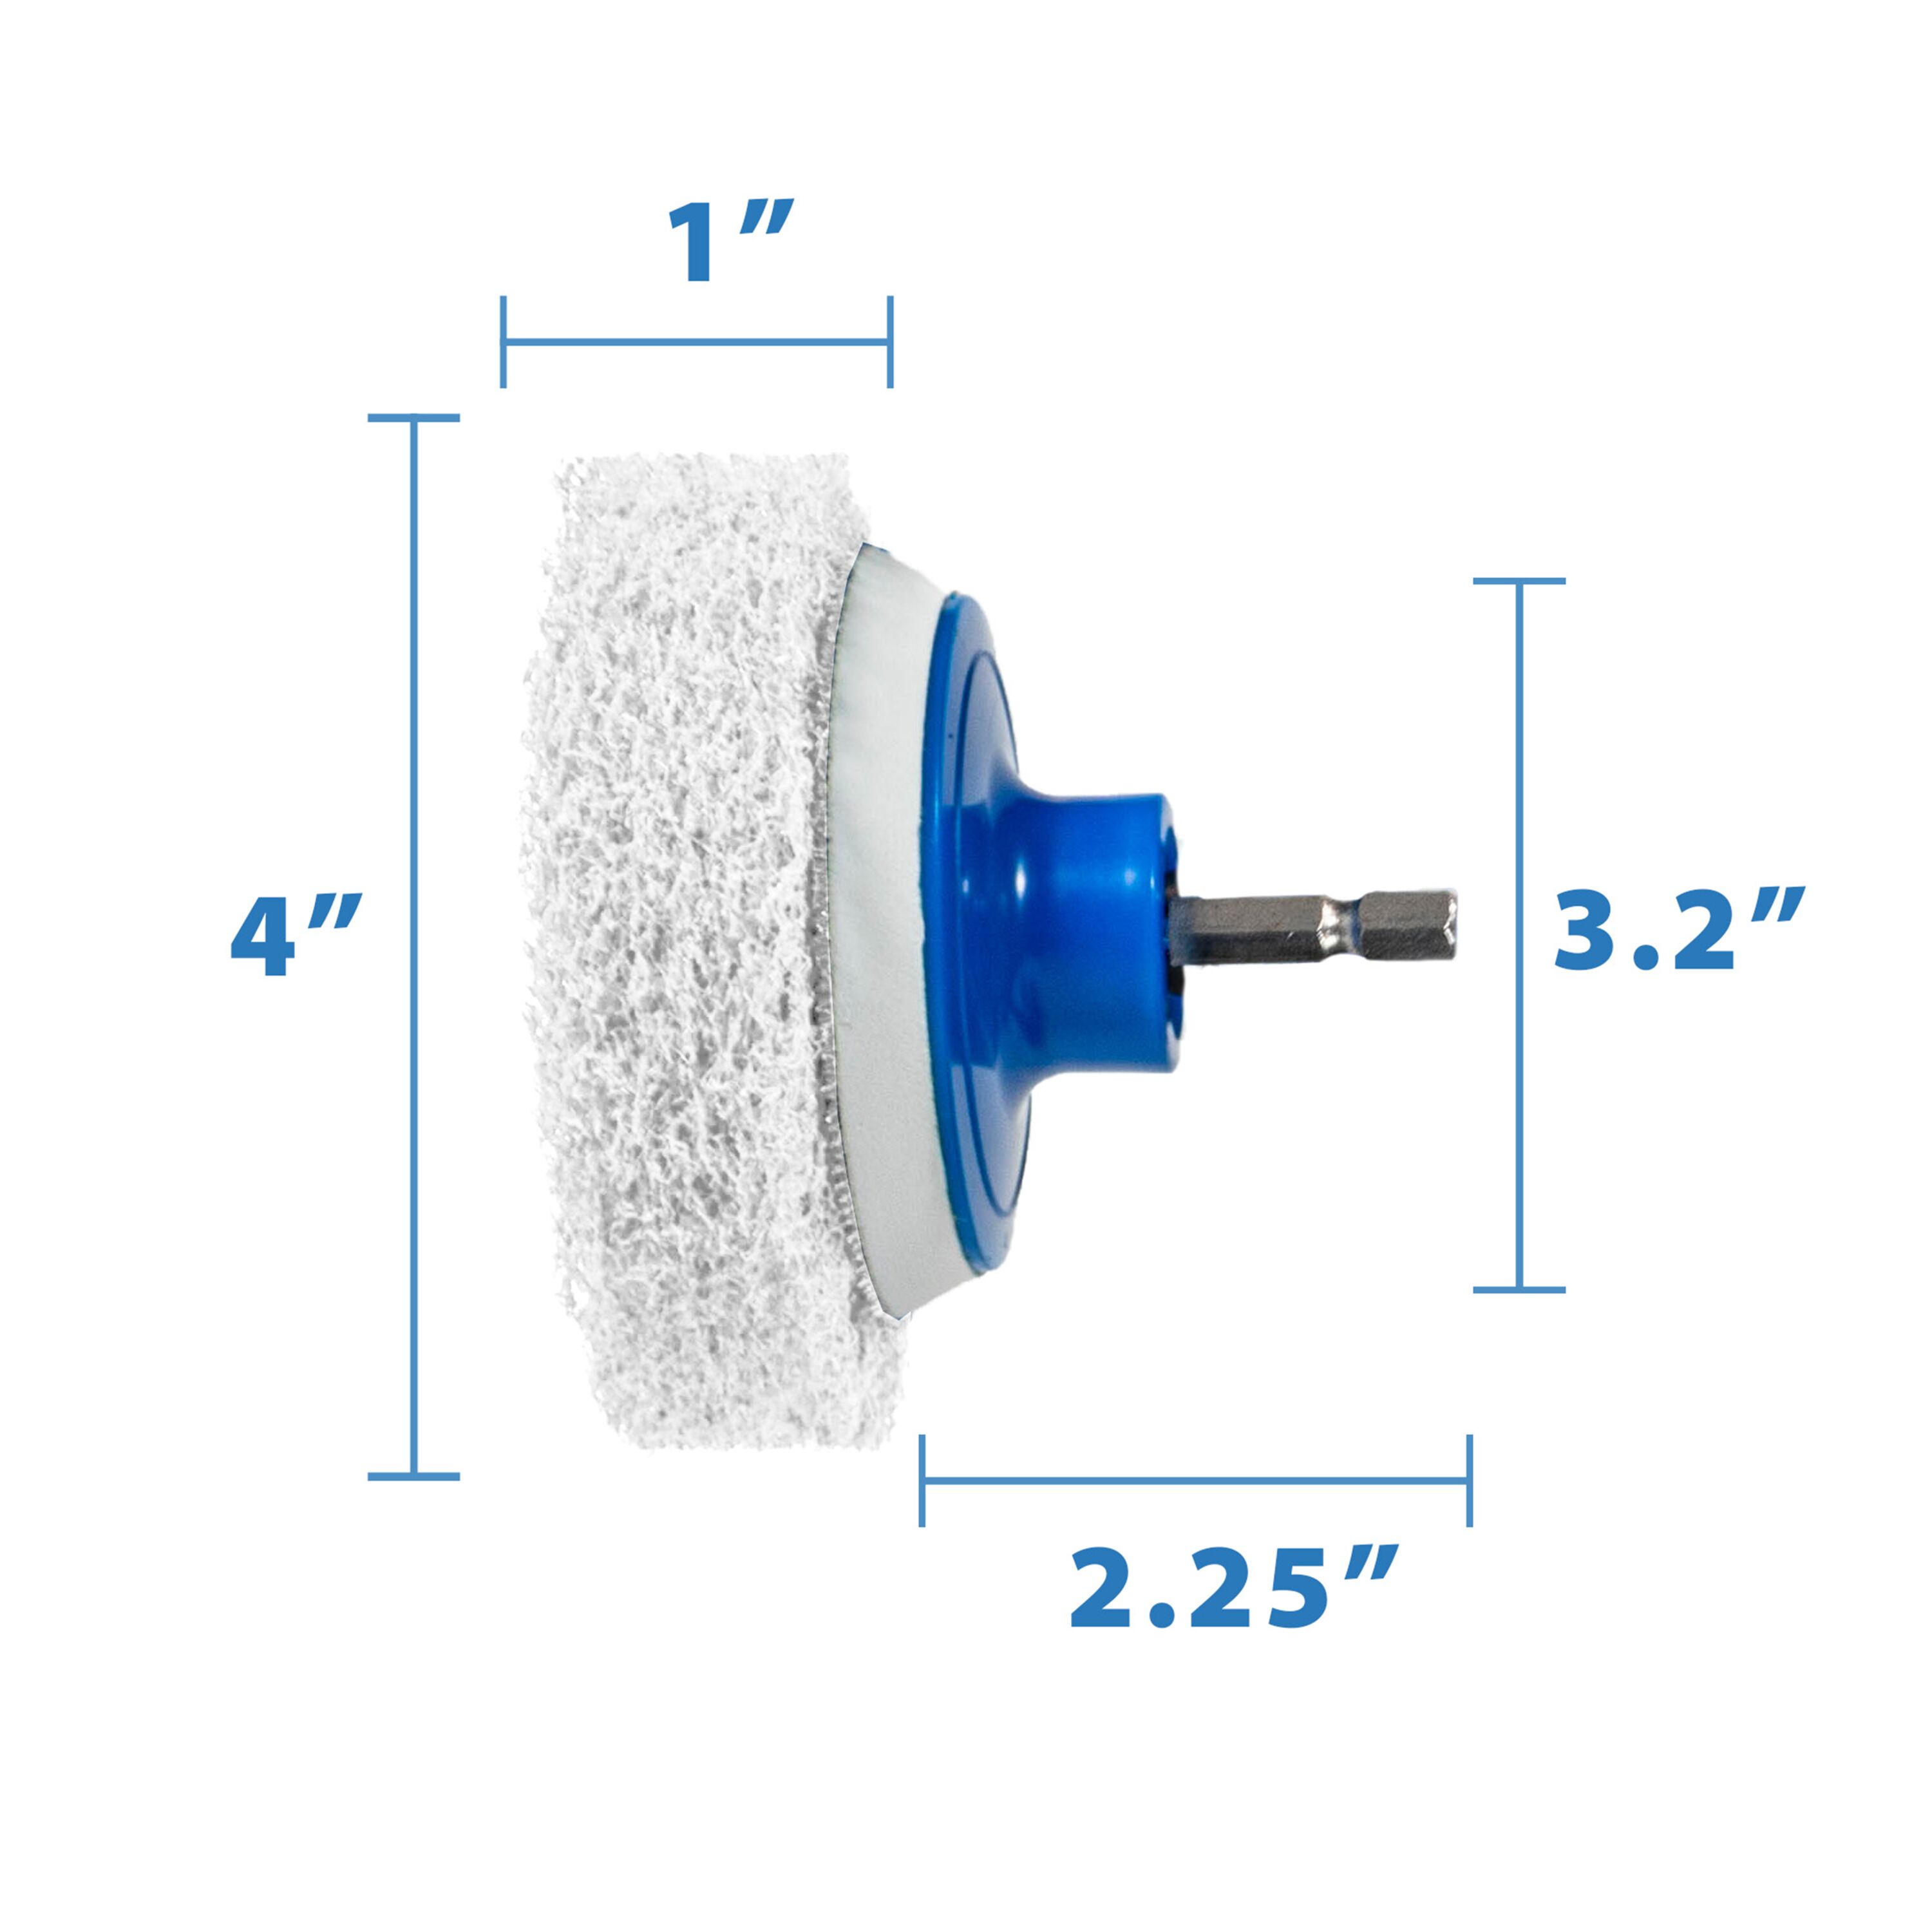 RotoScrub 7 Pack Multi-Purpose Drill Brush Kit for Cleaning Bathrooms,  Showers, Tubs, Tile, Floors, Sinks, Toilets, Grout and Grime Removal